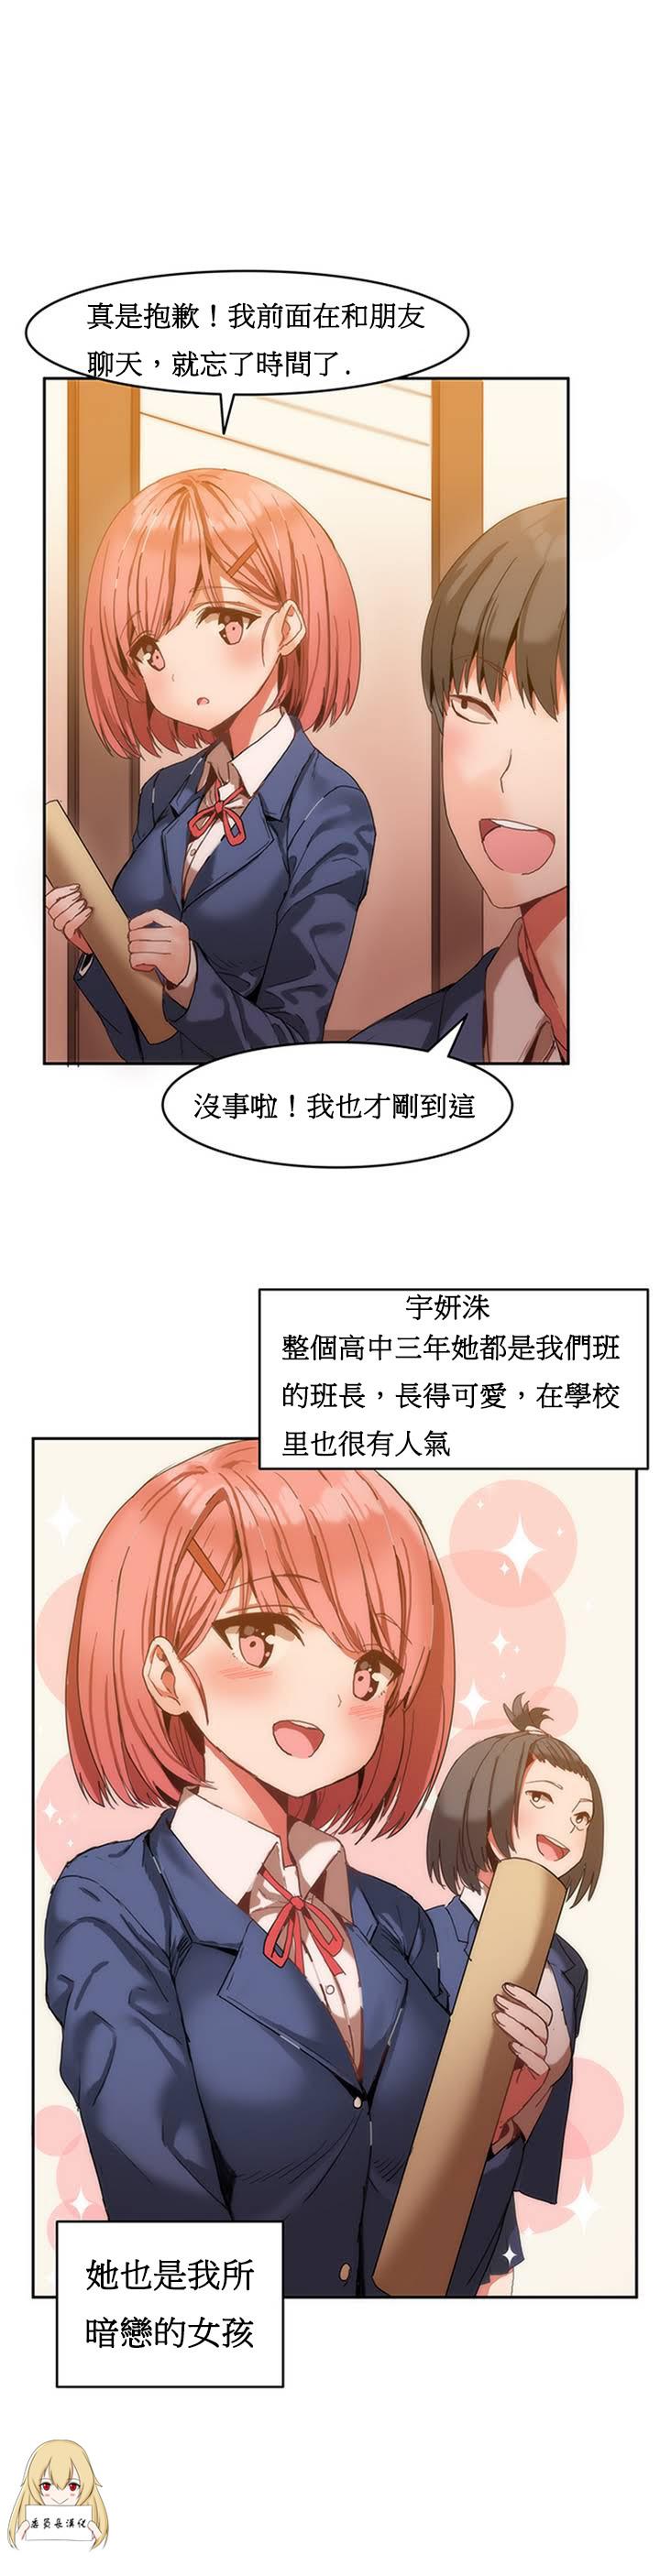 Morena Hahri's Lumpy Boardhouse Ch. 1~12【委員長個人漢化】（持續更新） Head - Page 5